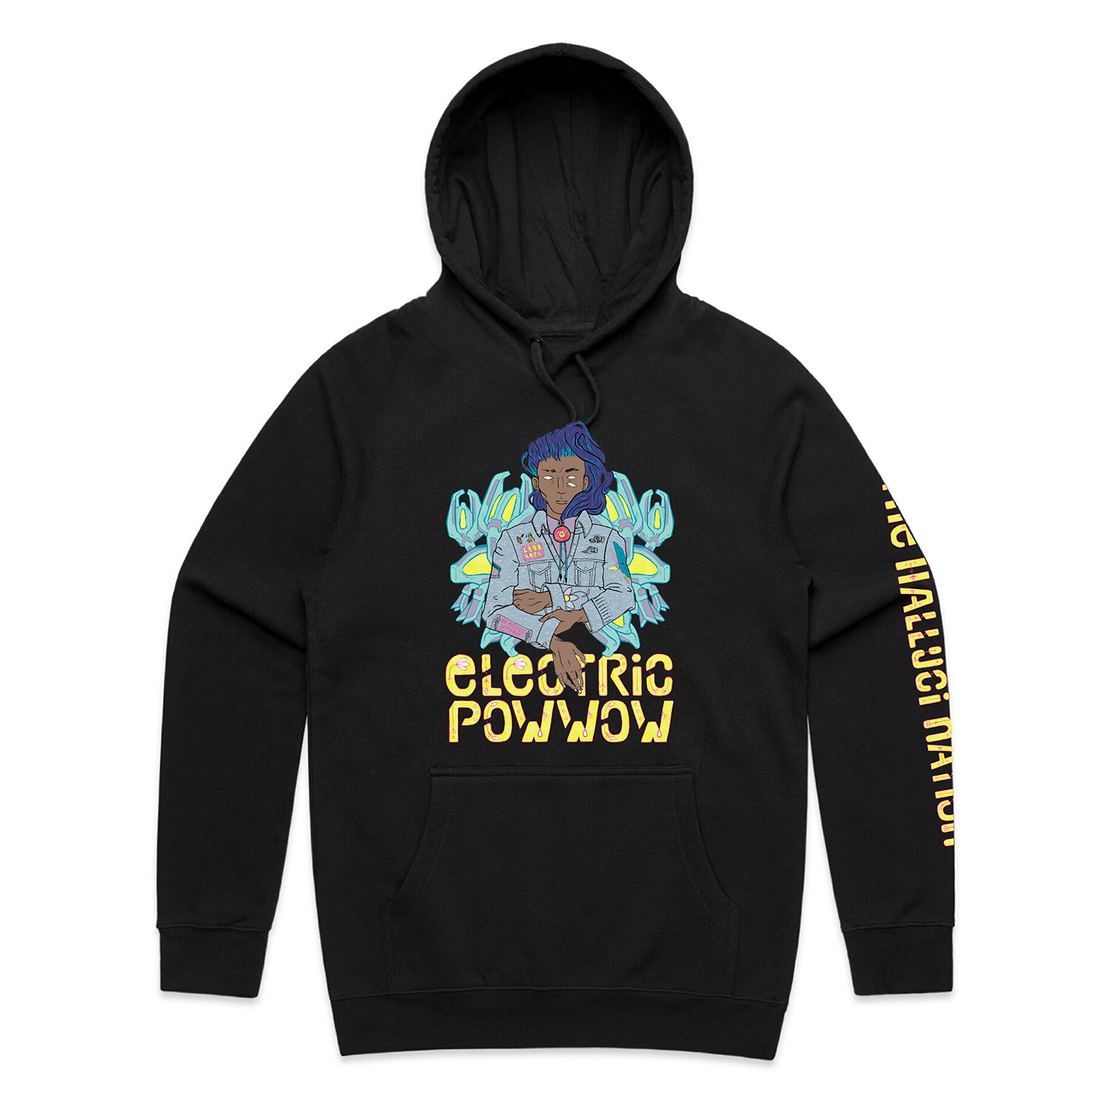 The Halluci Nation - Electric Pow Wow Hoodie